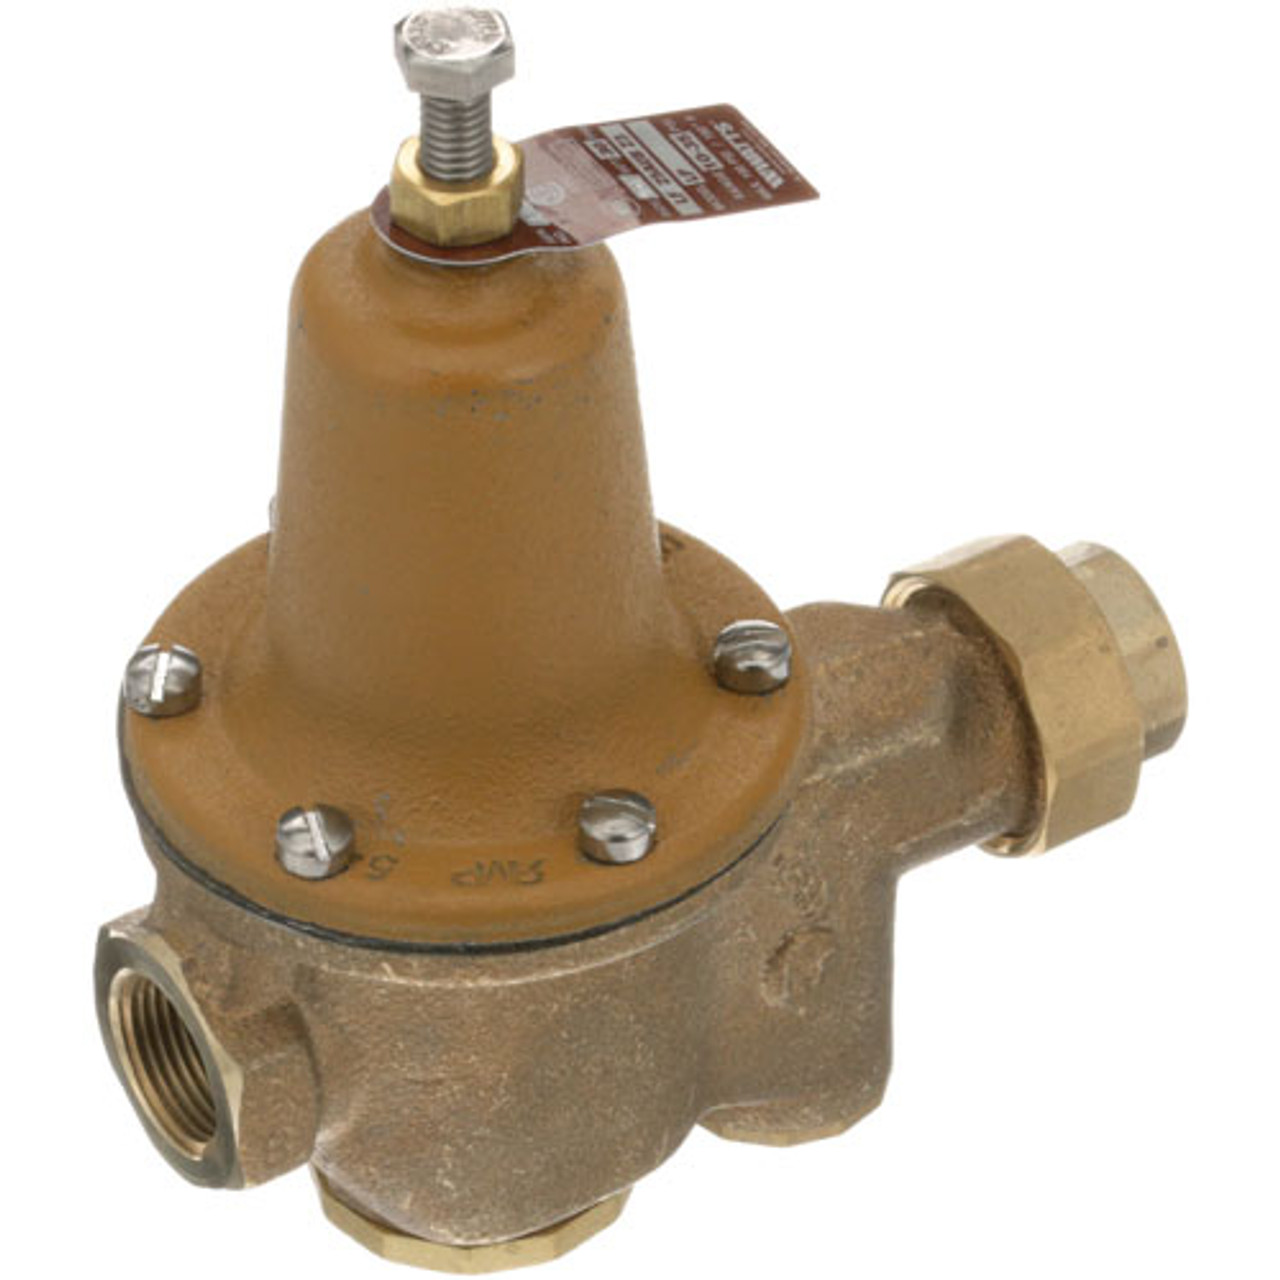 Pressure Reducing Valve 3/4" - Replacement Part For Hobart 98223